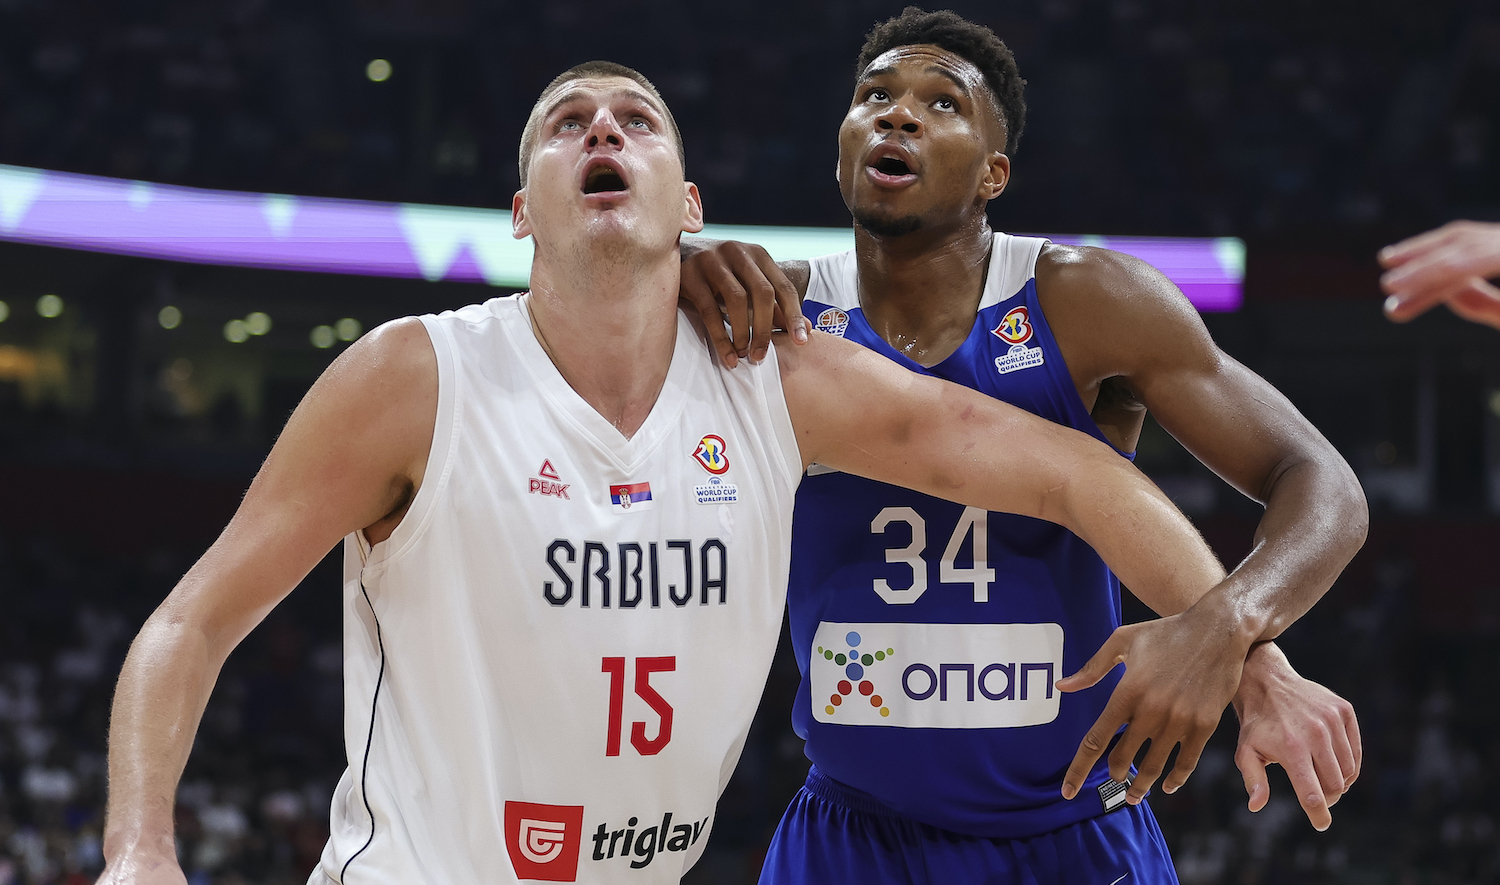 BELGRADE, SERBIA - AUGUST 25: Nikola Jokic (L) of Serbia in action against Giannis Antetokounmpo (R) of Greece during the FIBA Basketball World Cup 2023 Qualifier game between Serbia and Greece at Stark Arena on August 25, 2022 in Belgrade, Serbia. (Photo by Srdjan Stevanovic/Getty Images)